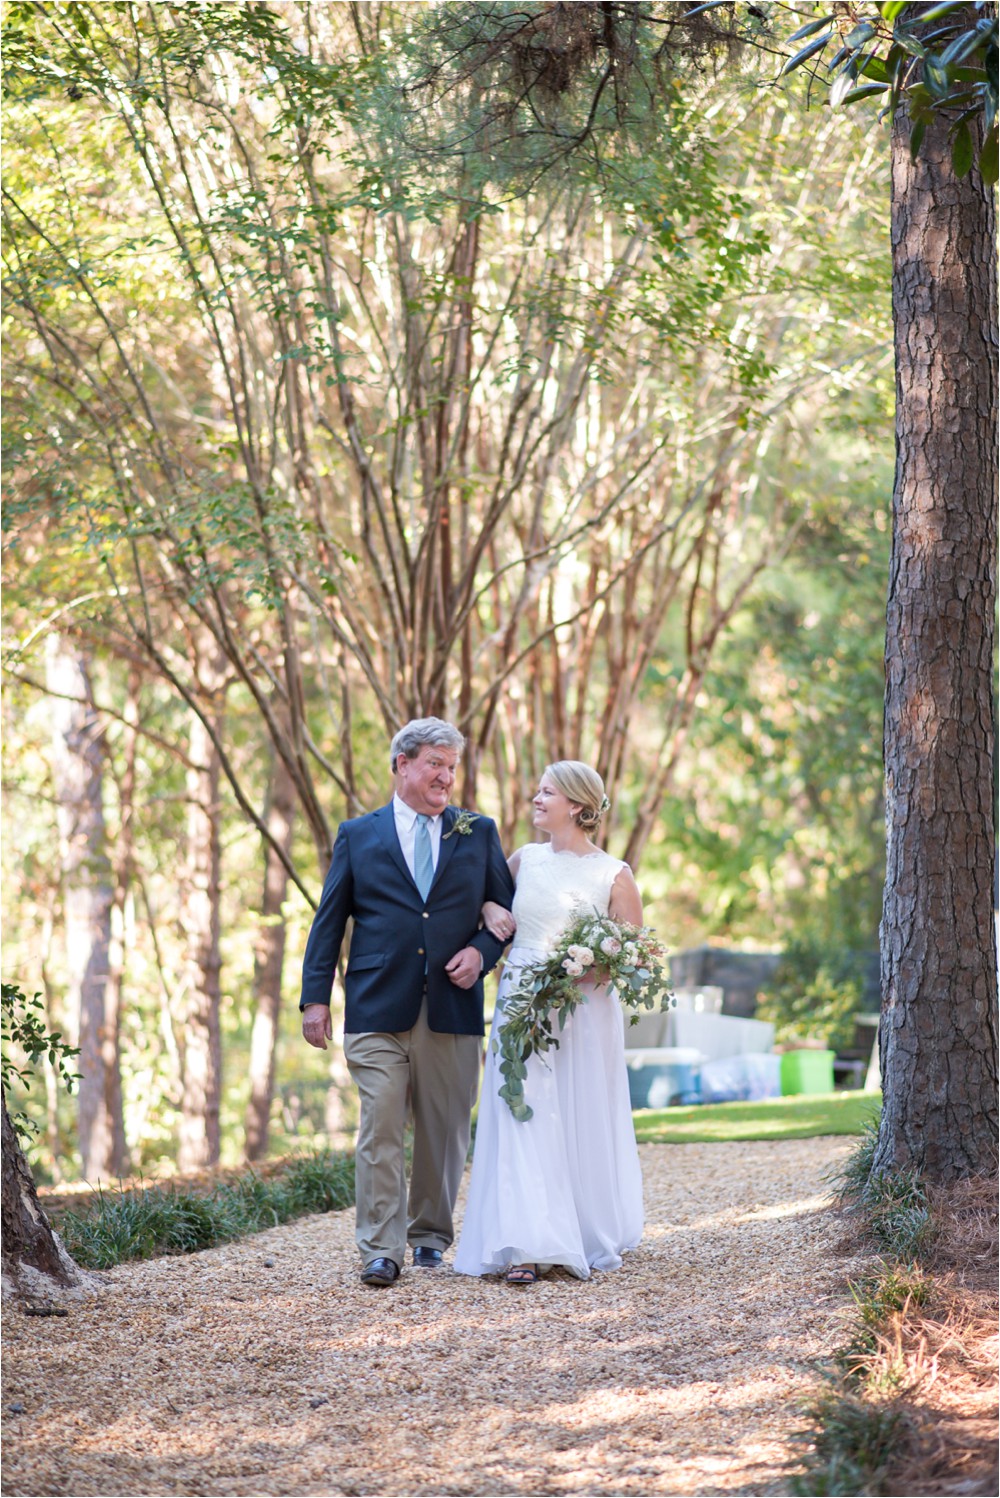 intimate-outdoor-wedding-at-home-in-columbus-georgia-by-eliza-morrill-photography_0025